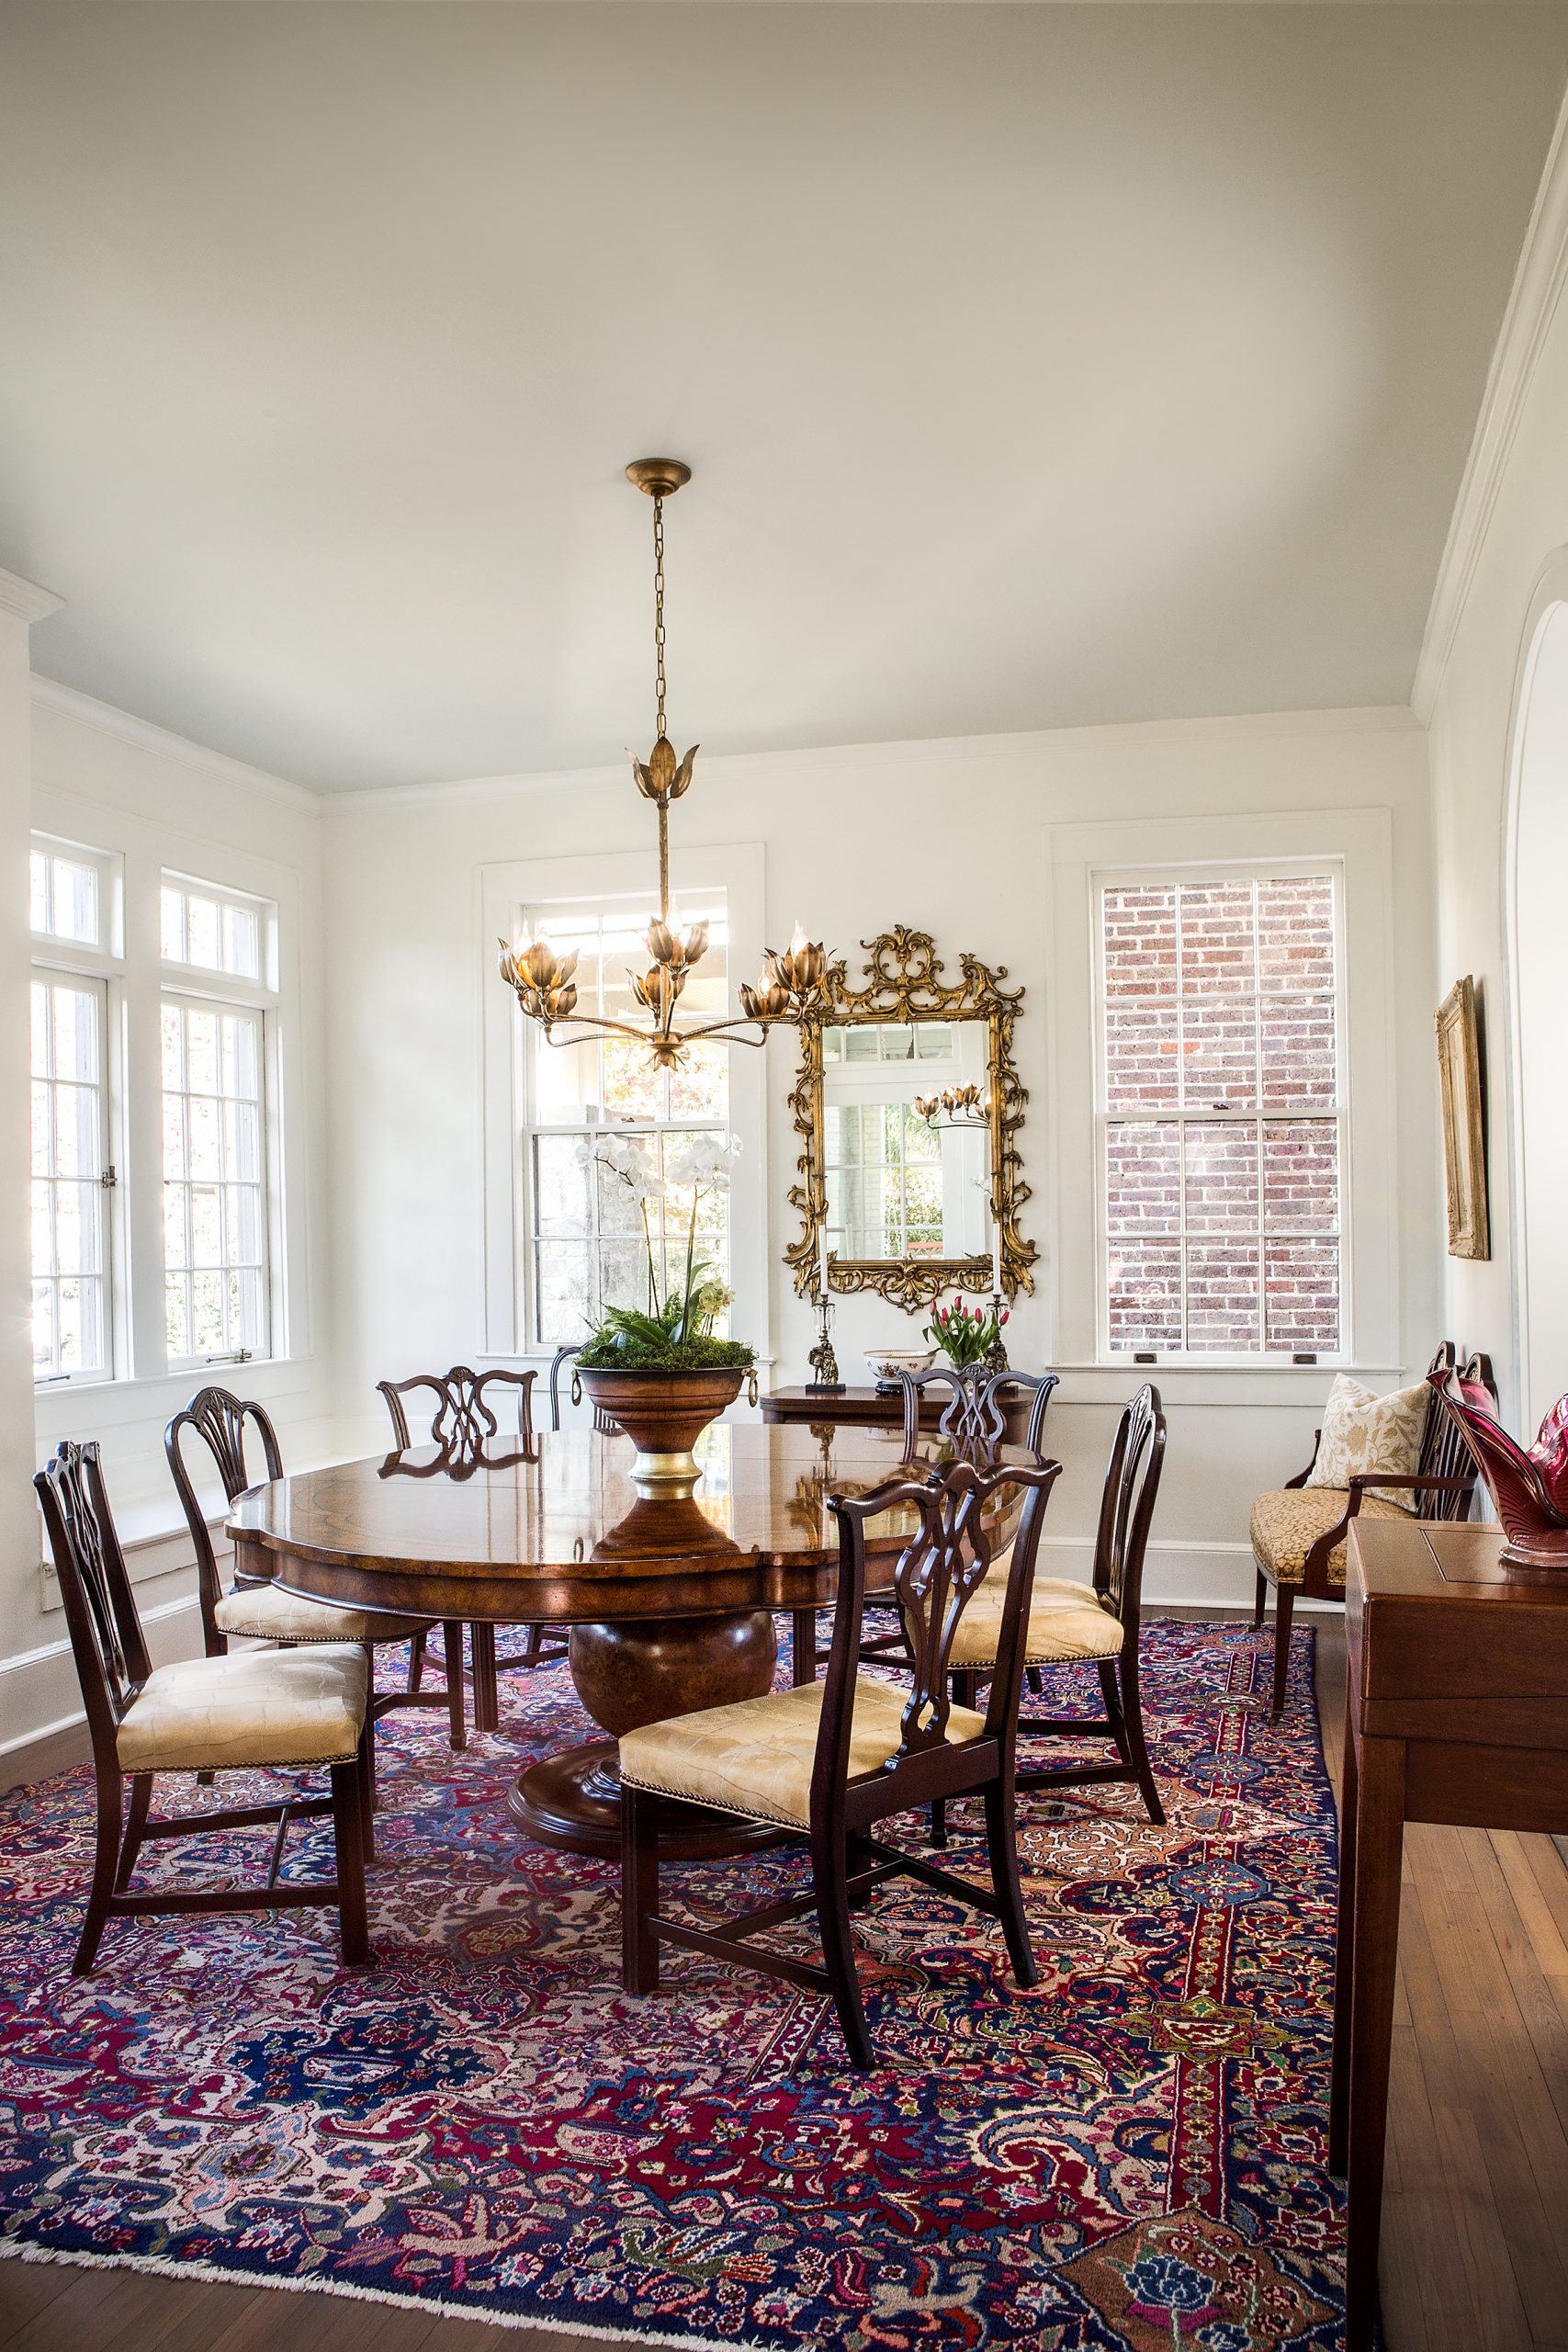 The dining room, located on the front of the house, was kept in its original state to showcase the authentic casement windows and hardware with old hand-blown glass. 
